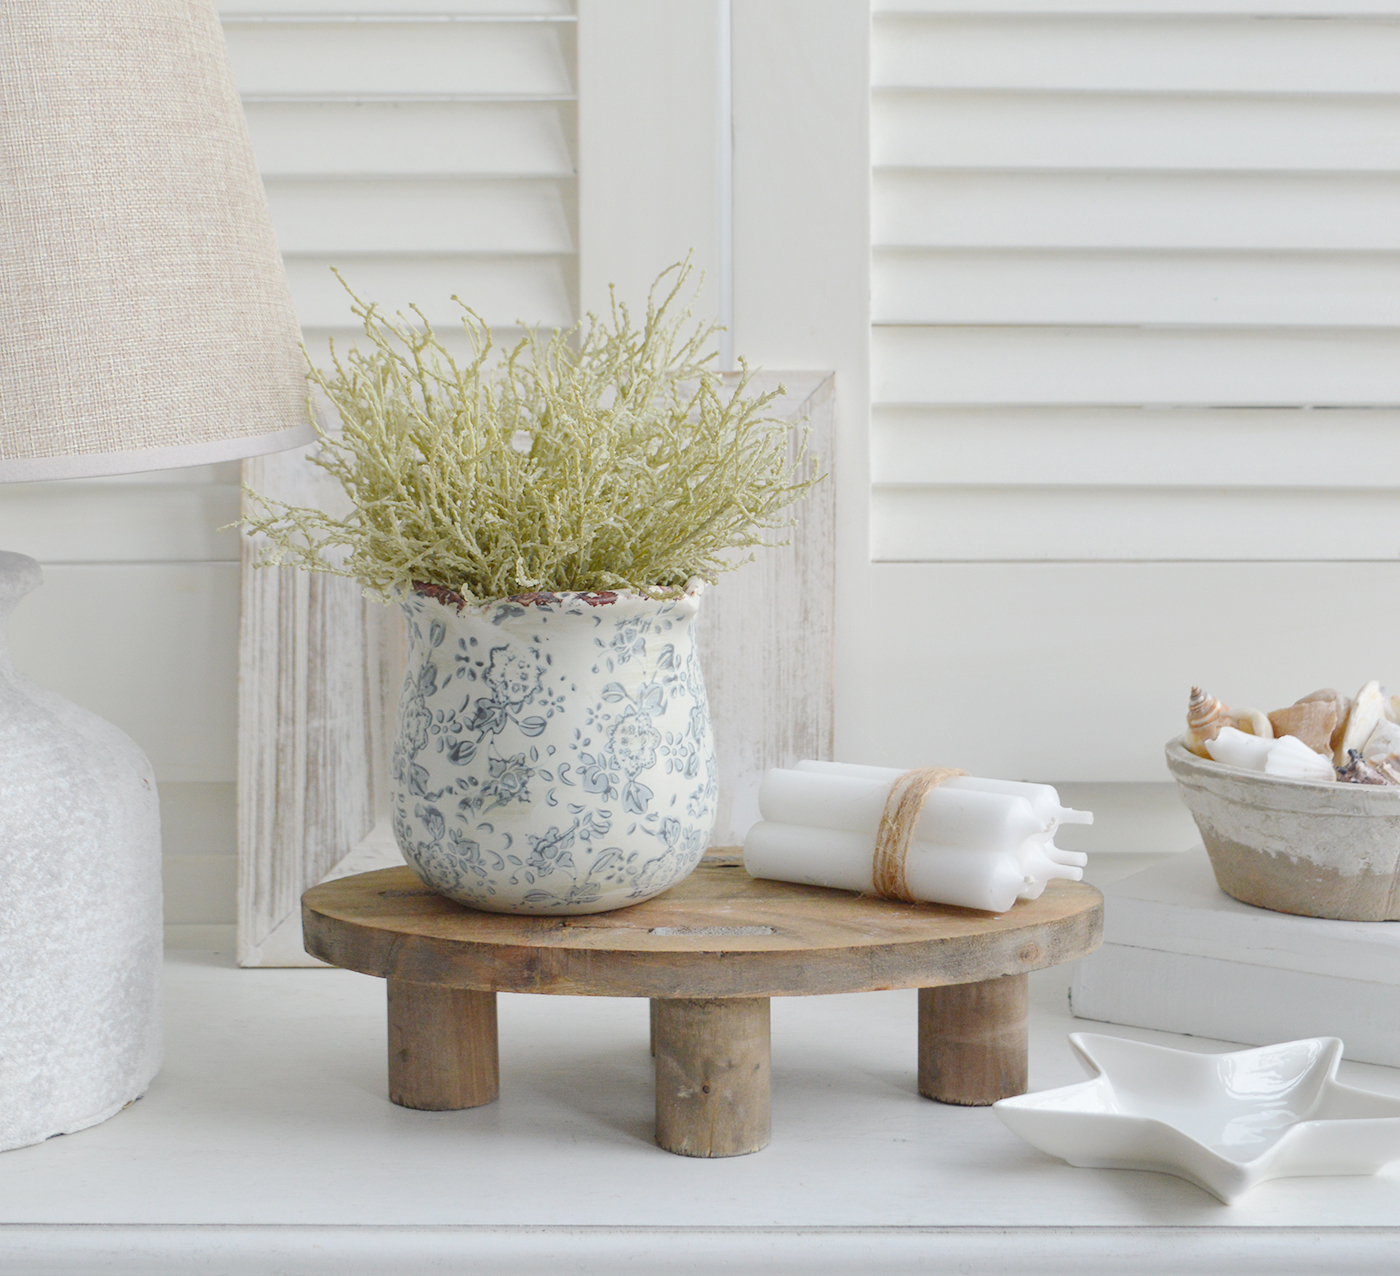 The mini Pawtucket stool witht the Claremont pot for styling shelves and consoles in New England coastal, modern country and farmhouse interiors.